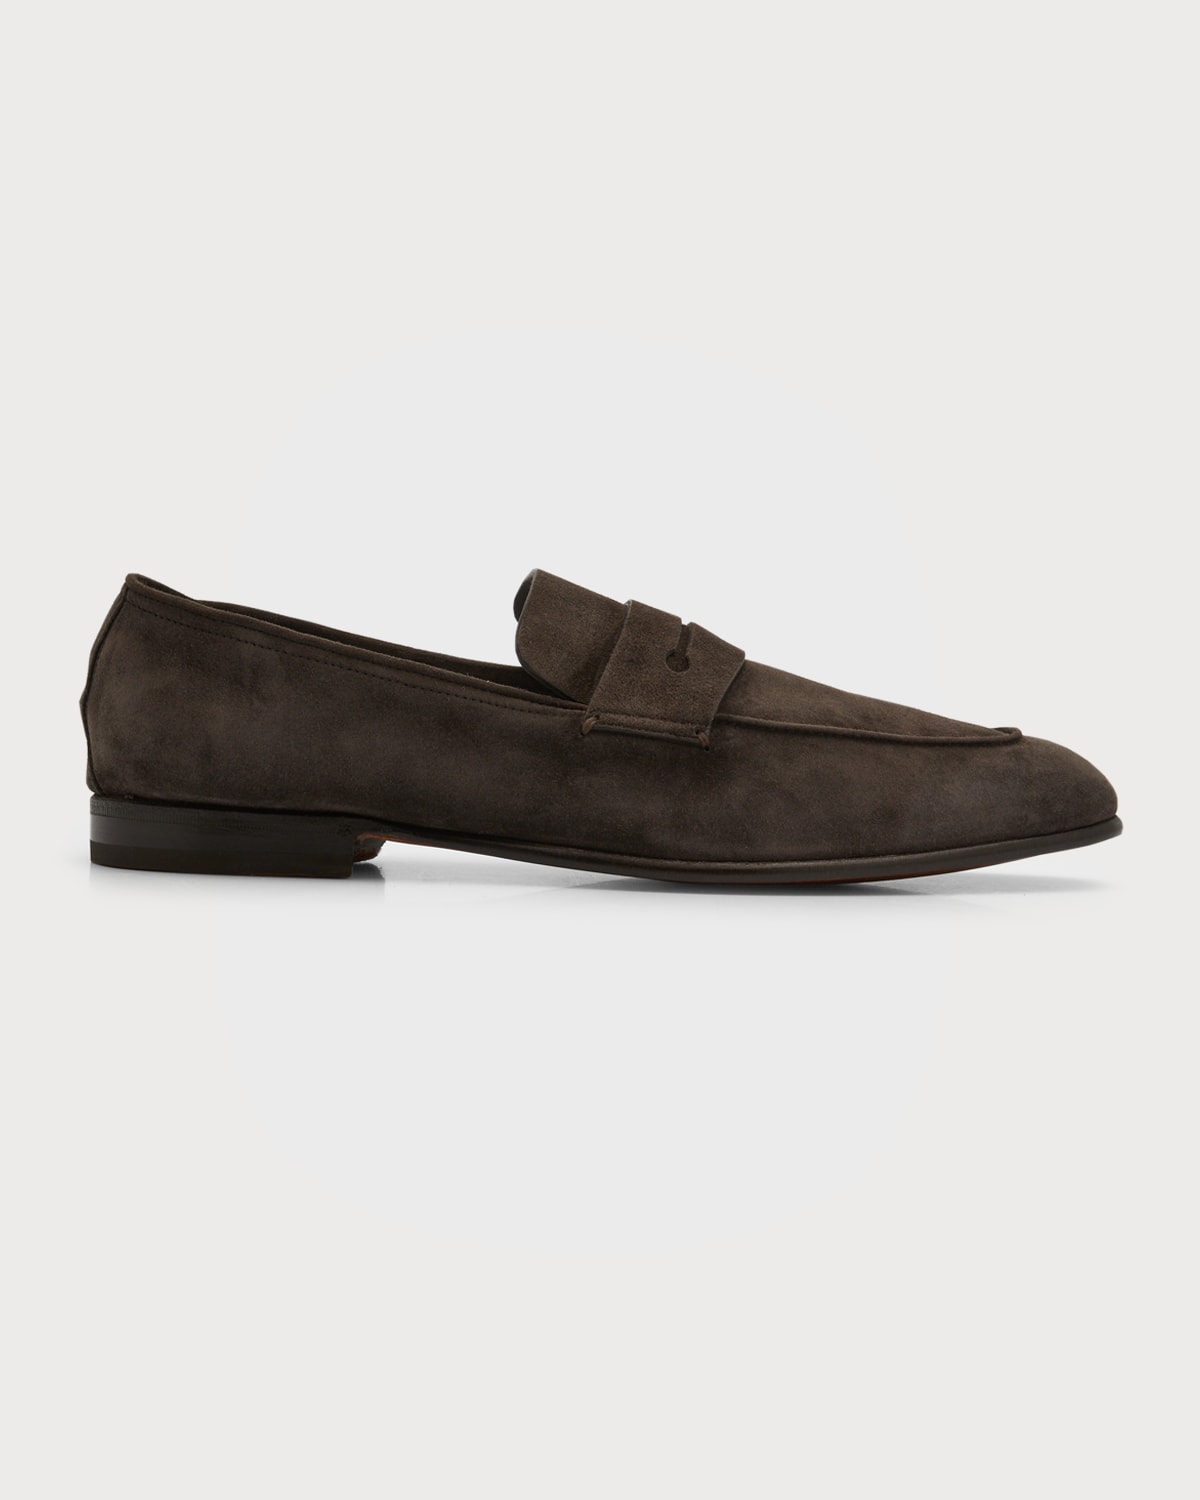 Zegna Men's Lasola Suede-leather Penny Loafers In Meduim Brown